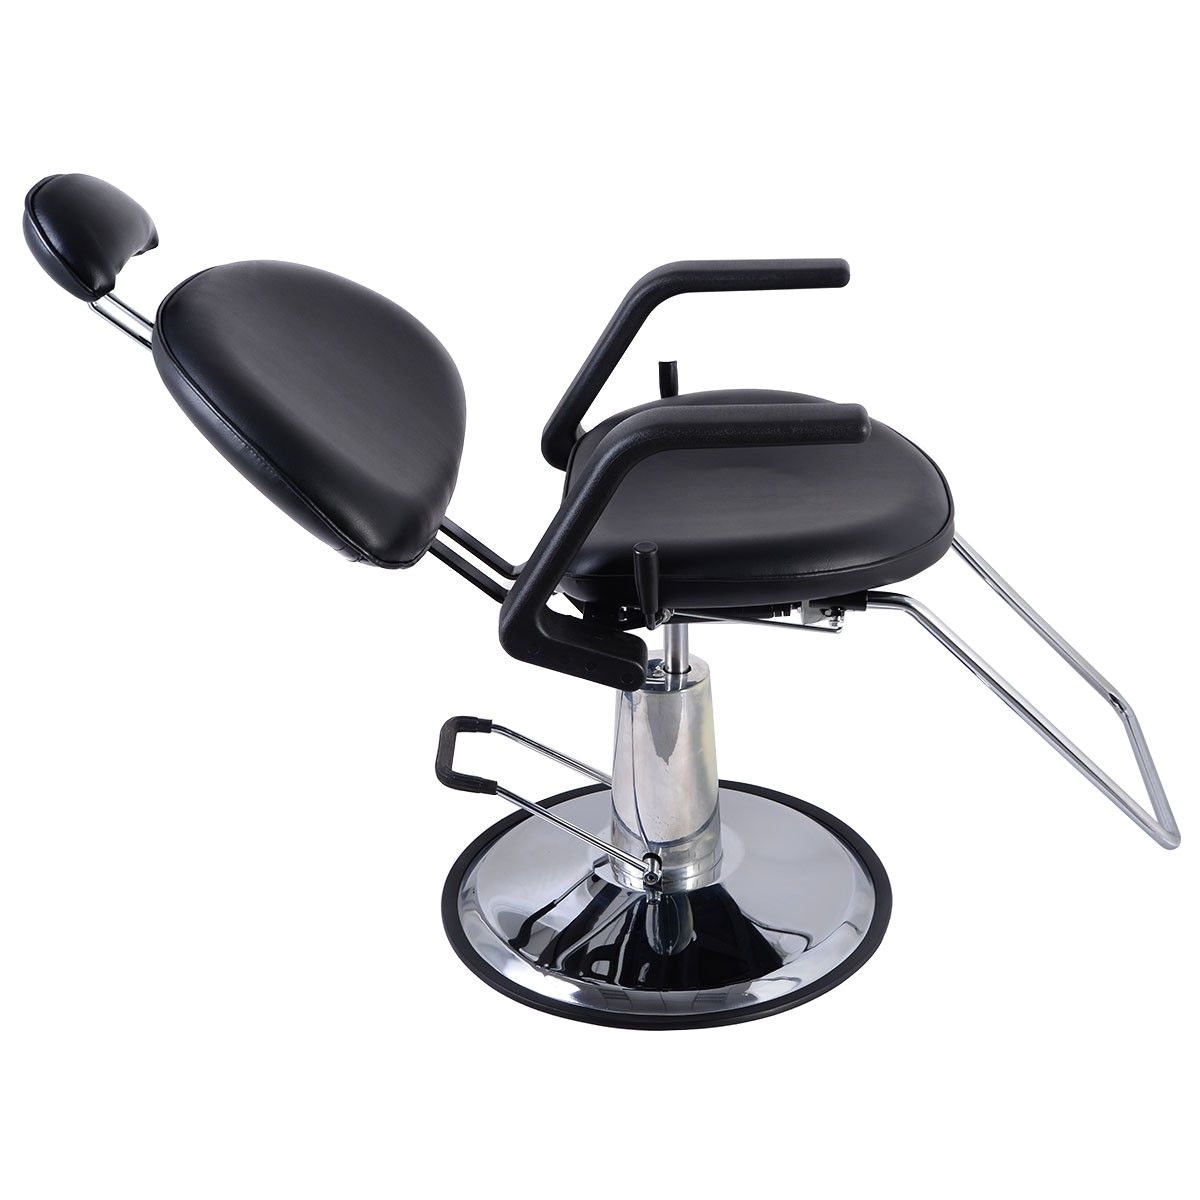 Shampoo Chair for Sale In Jamaica Reclining Hydraulic Barber Chair Salon Beauty Spa Styling